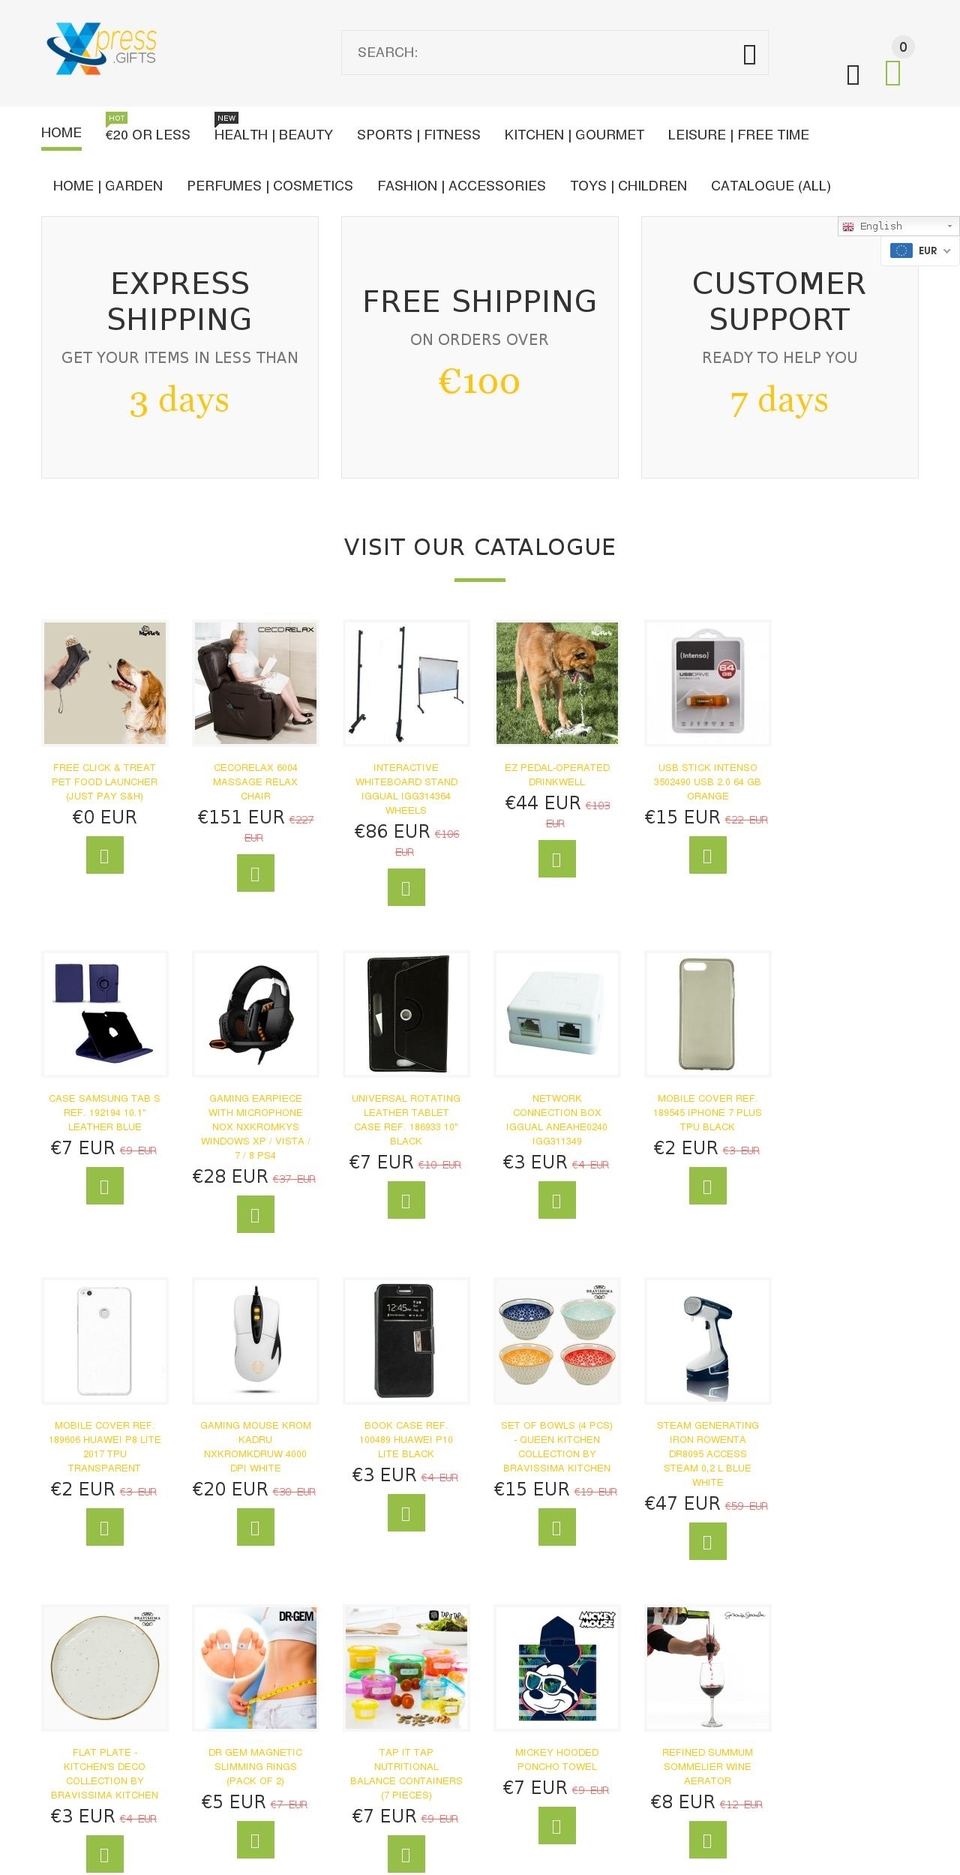 yourstore-v2-1-6 Shopify theme site example xpress.gifts